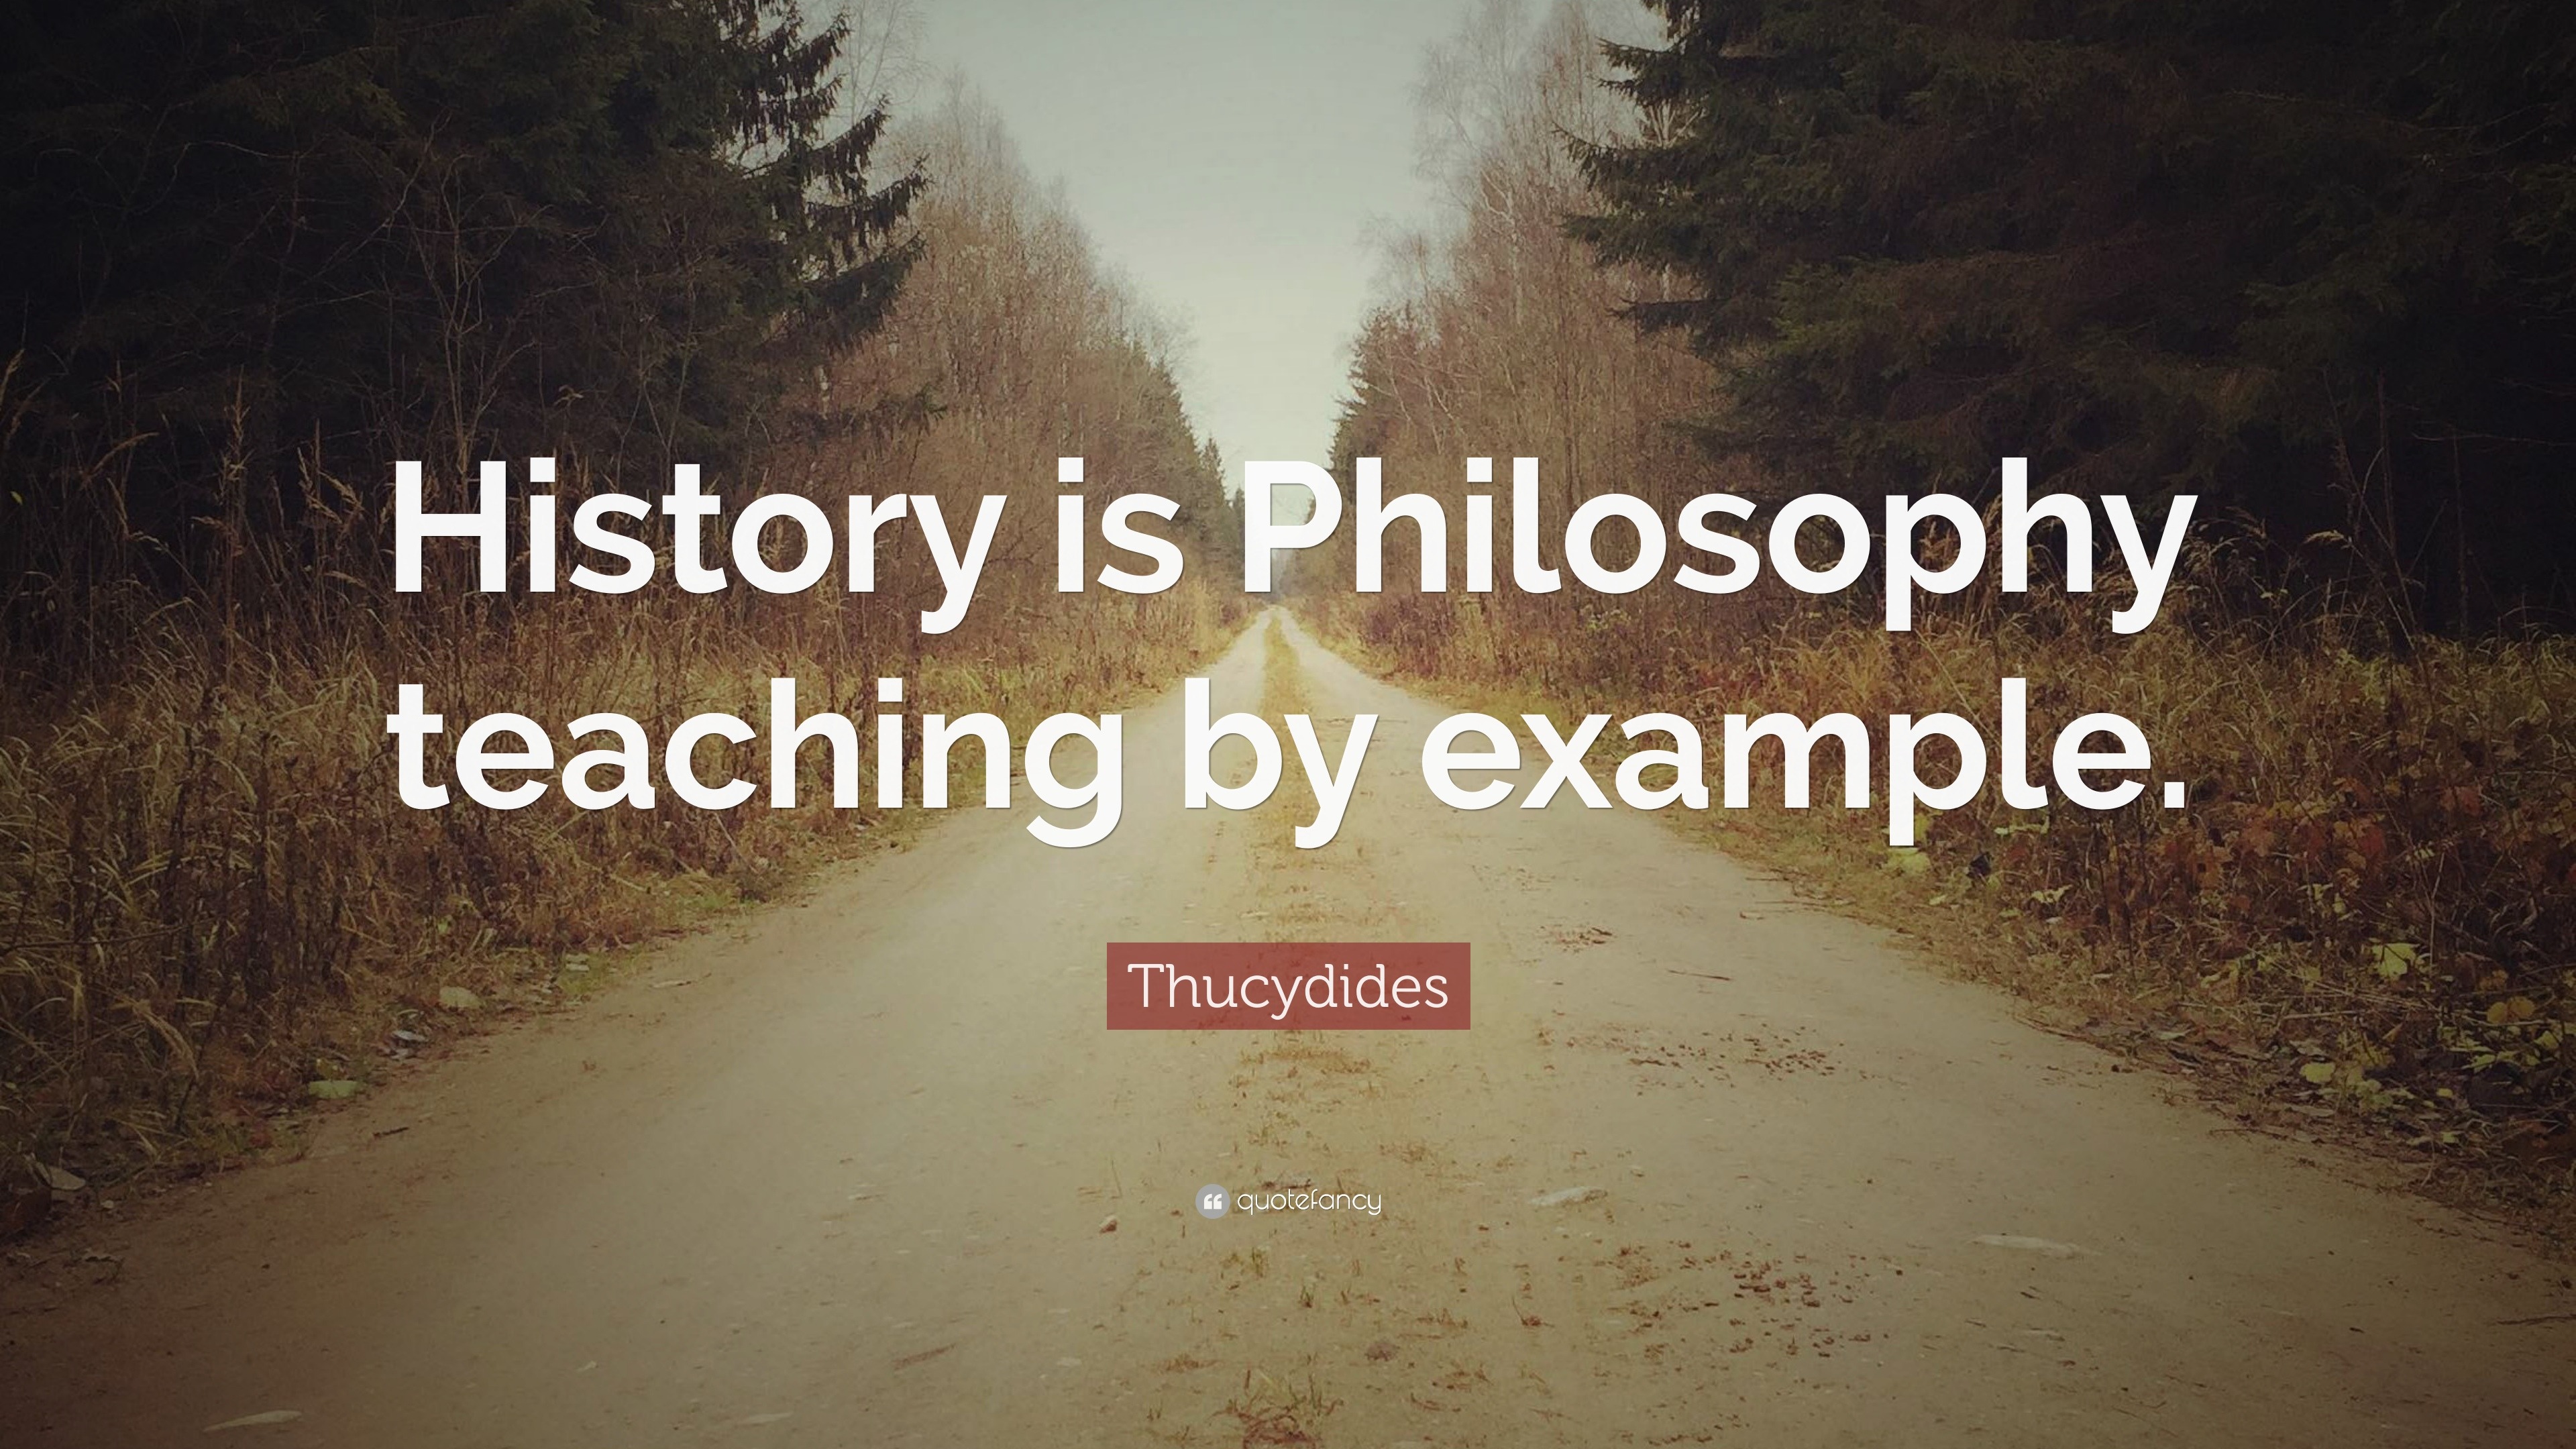 Thucydides Quote: “History is Philosophy teaching by example.” (9